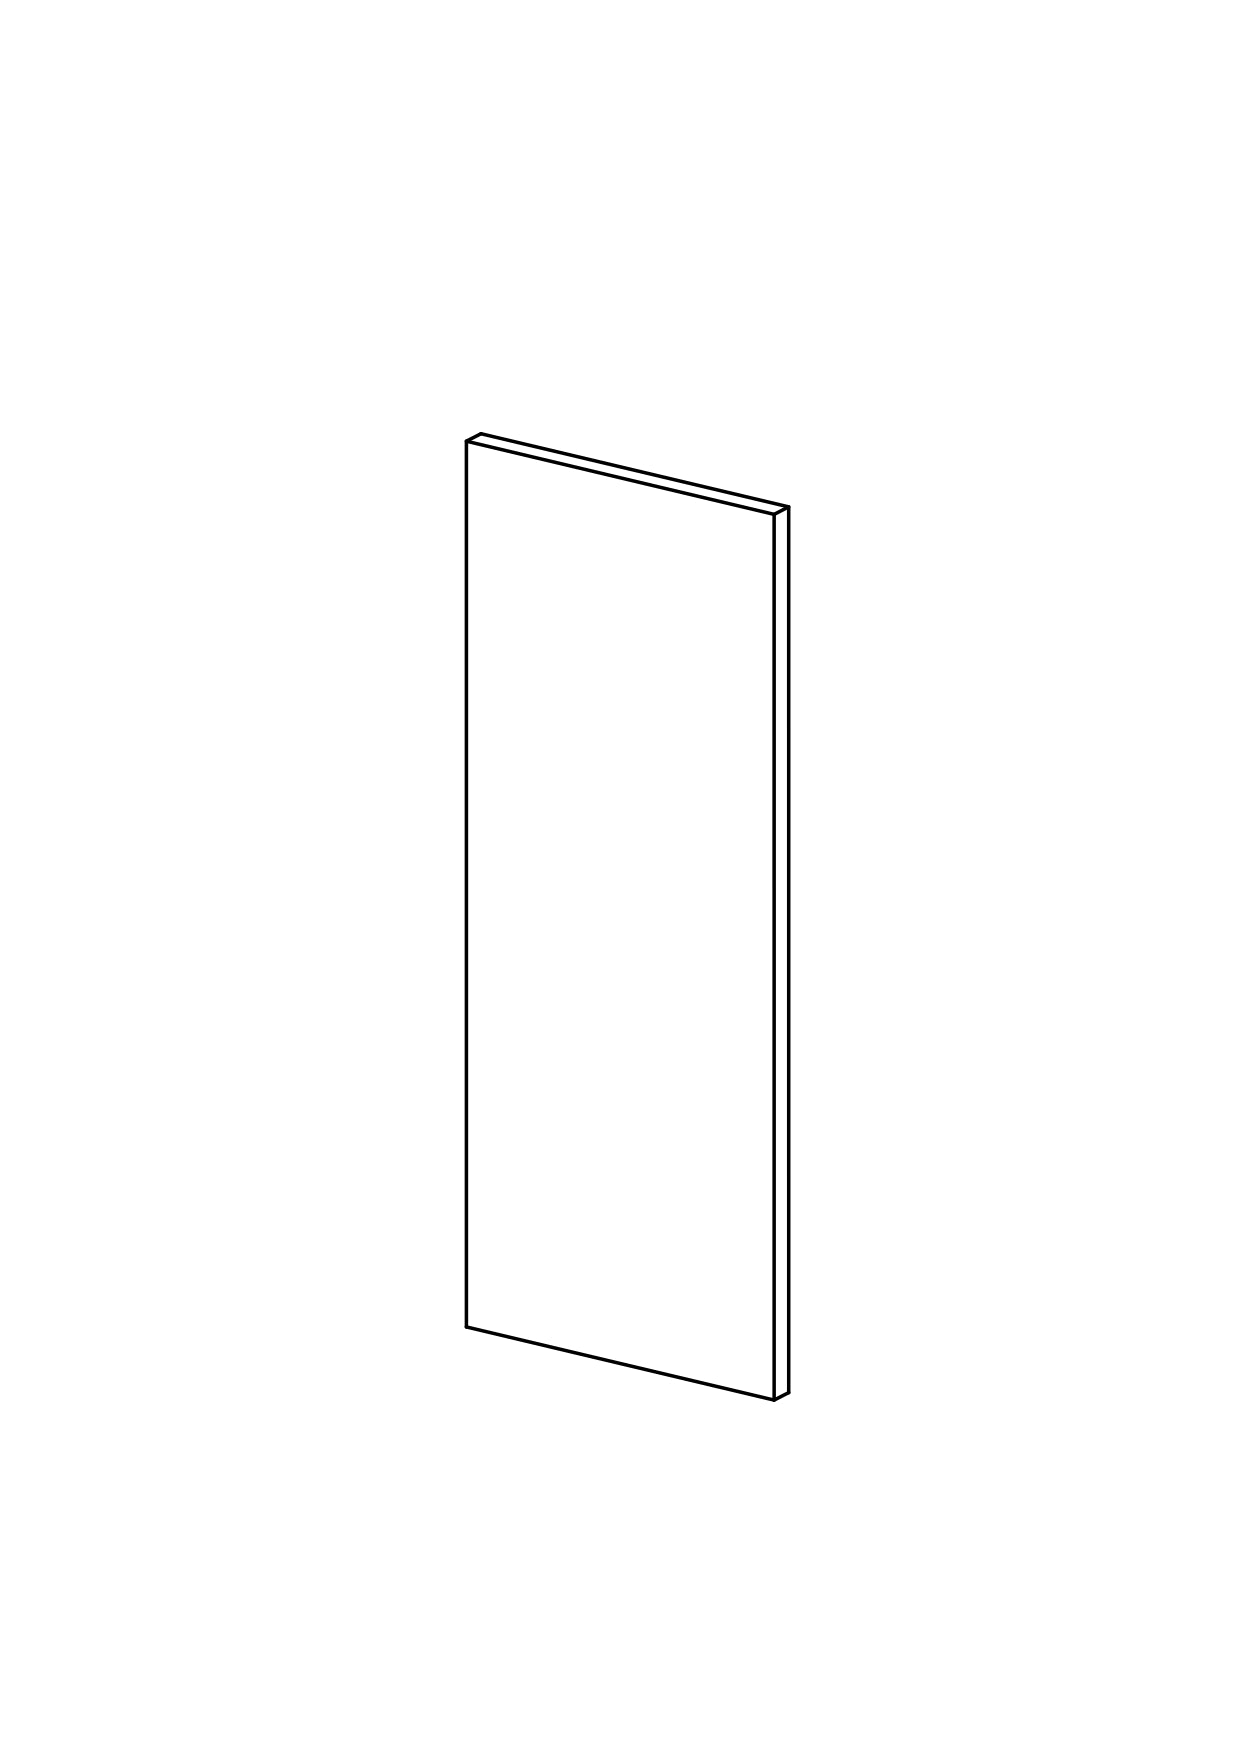 62x160 - Cover Panel - Plain - Unpainted (Raw) - METOD